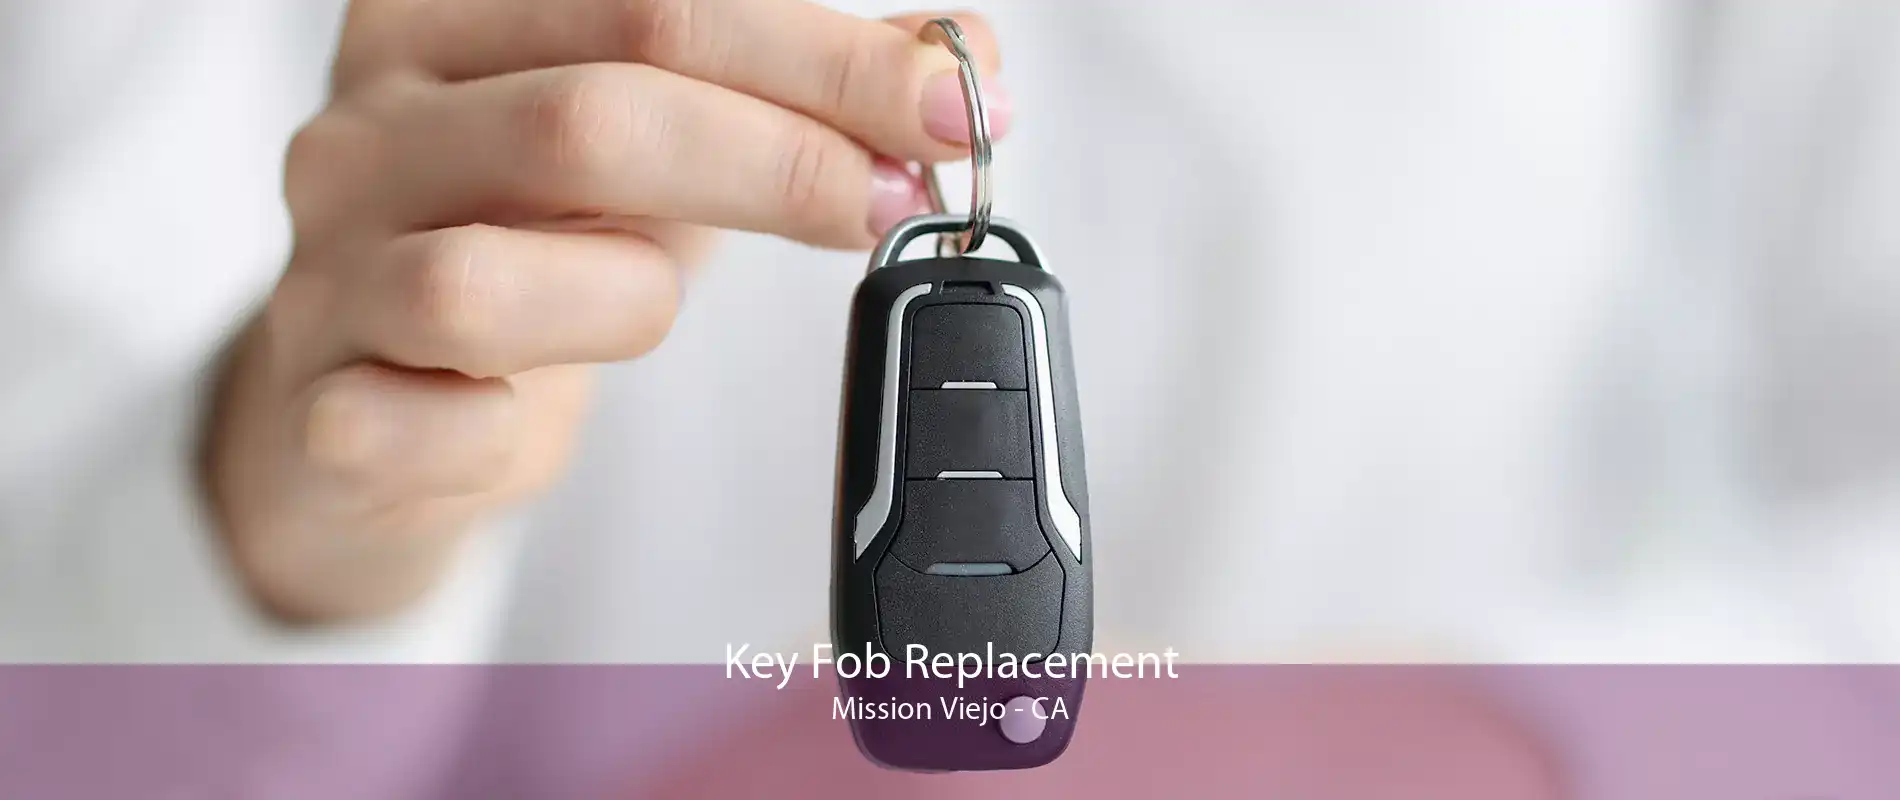 Key Fob Replacement Mission Viejo - CA